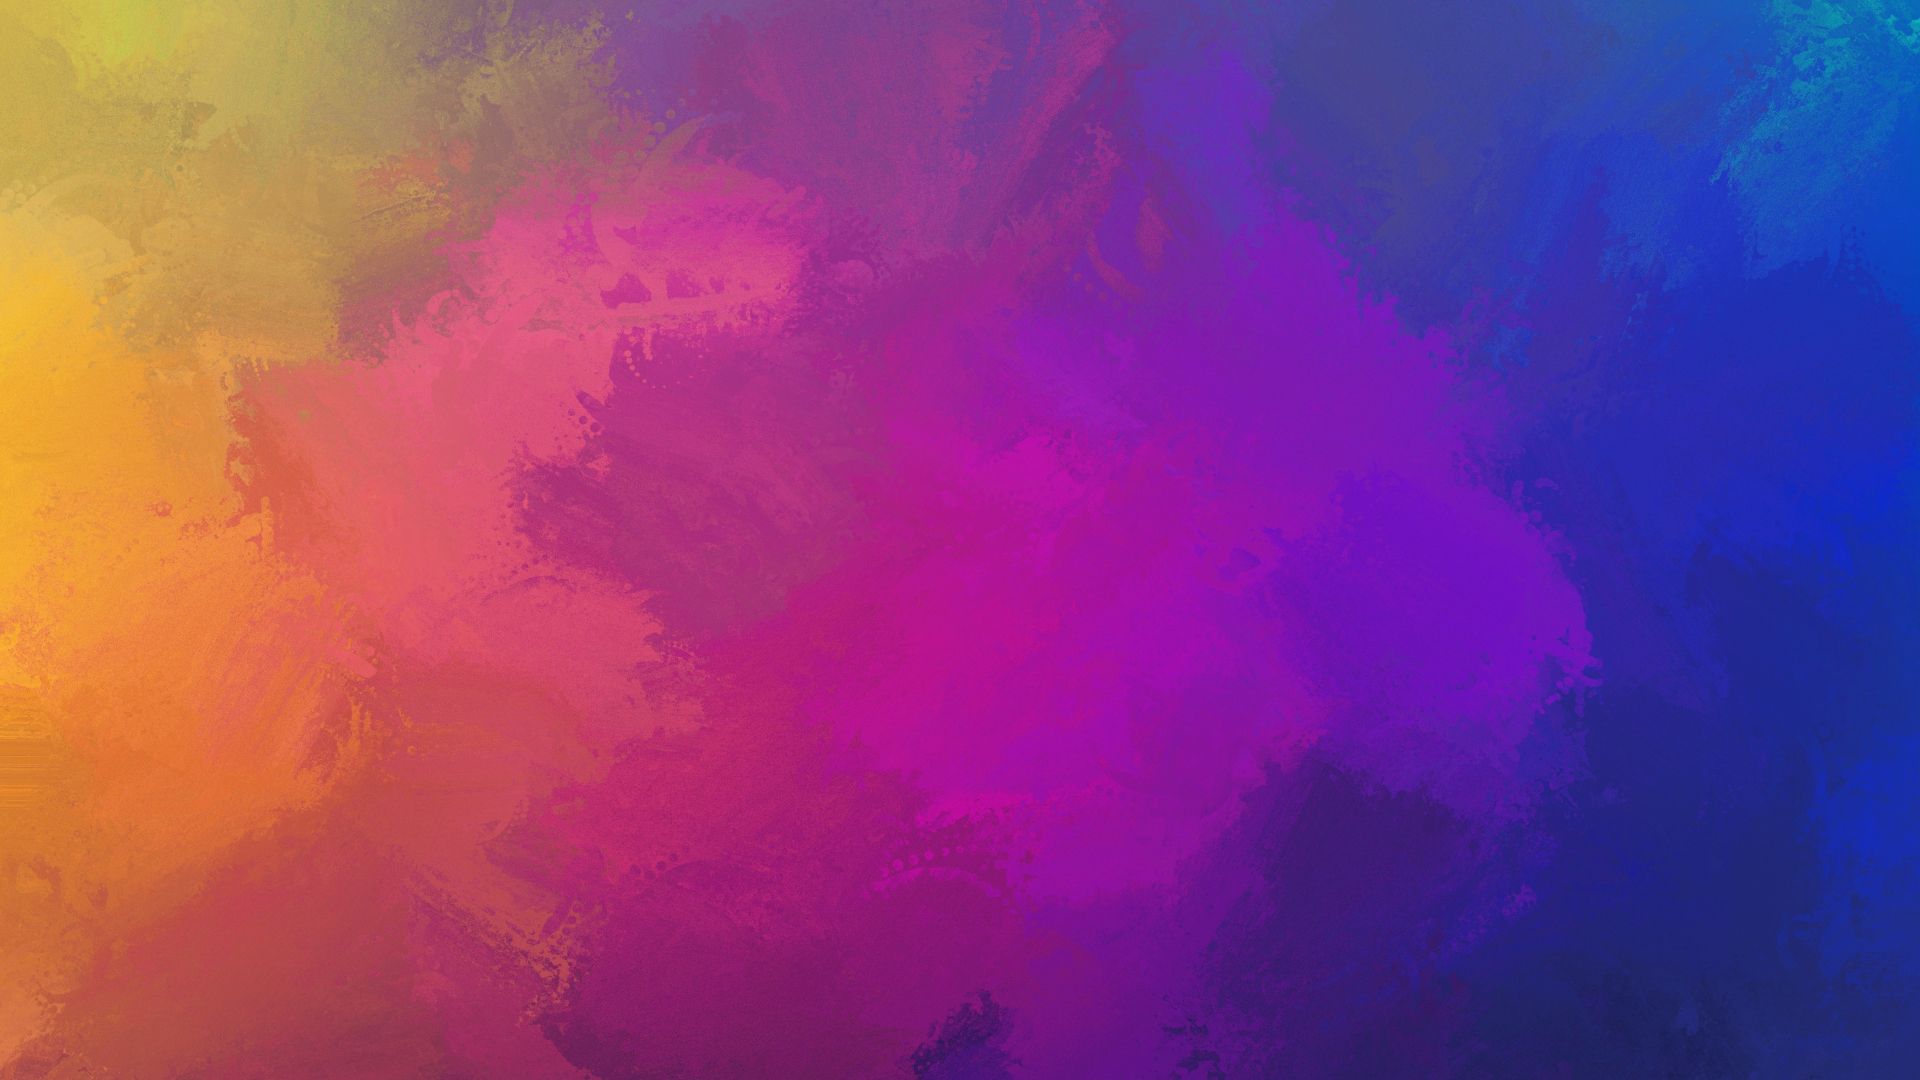 Download 1920x1080 wallpaper abstraction, paint, colorful, overlay